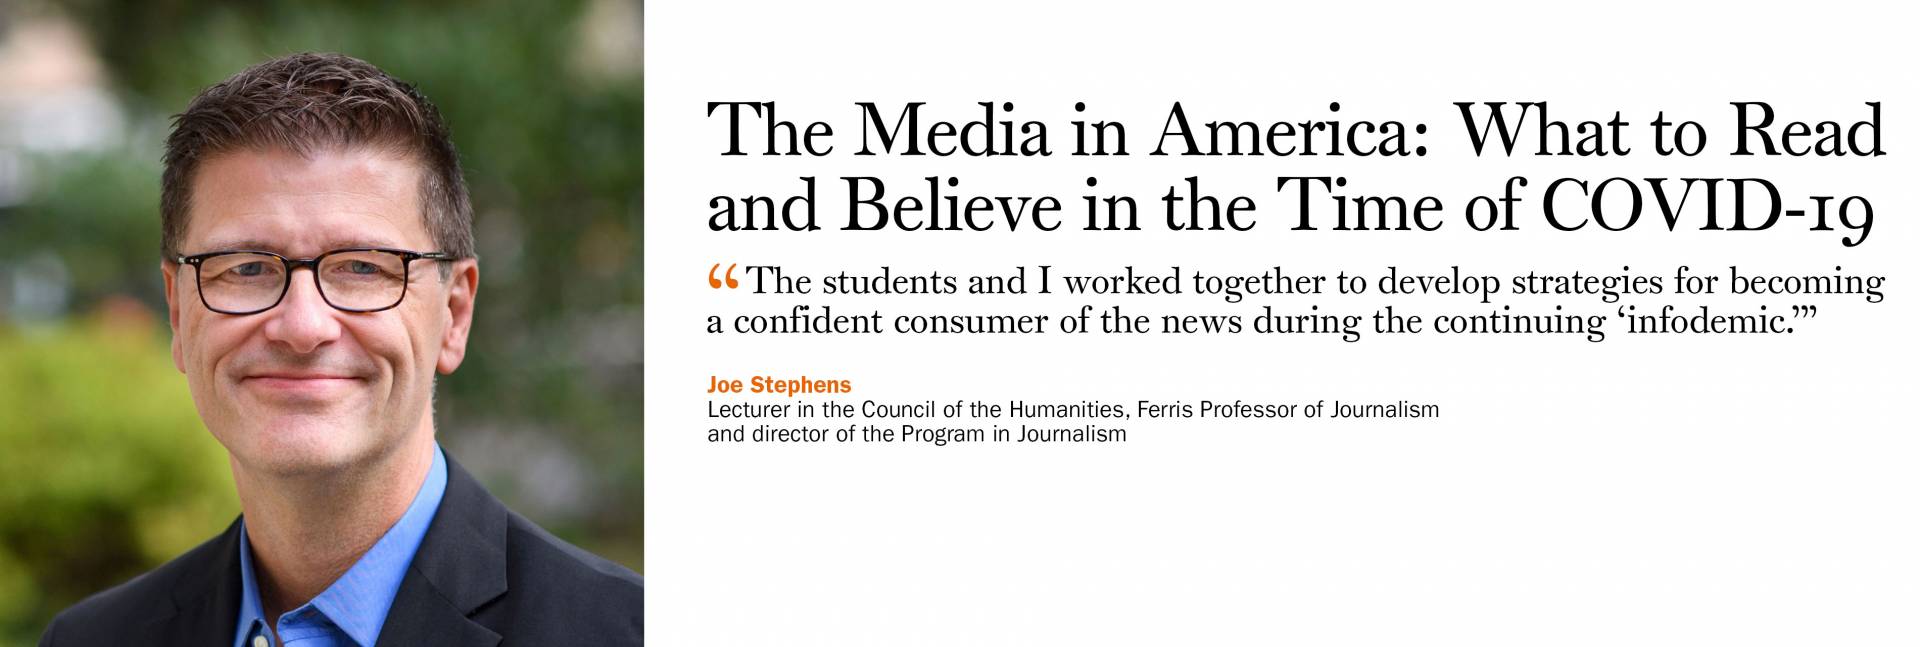 The Media in America: What to Read and Believe in the Time of COVID-19. Joe Stephens, lecturer in the Council of the Humanities, Ferris Professor of Journalism and director of the Program in Journalism. “The students and I worked together to develop strategies for becoming a confident consumer of the news during the continuing ‘infodemic.’”